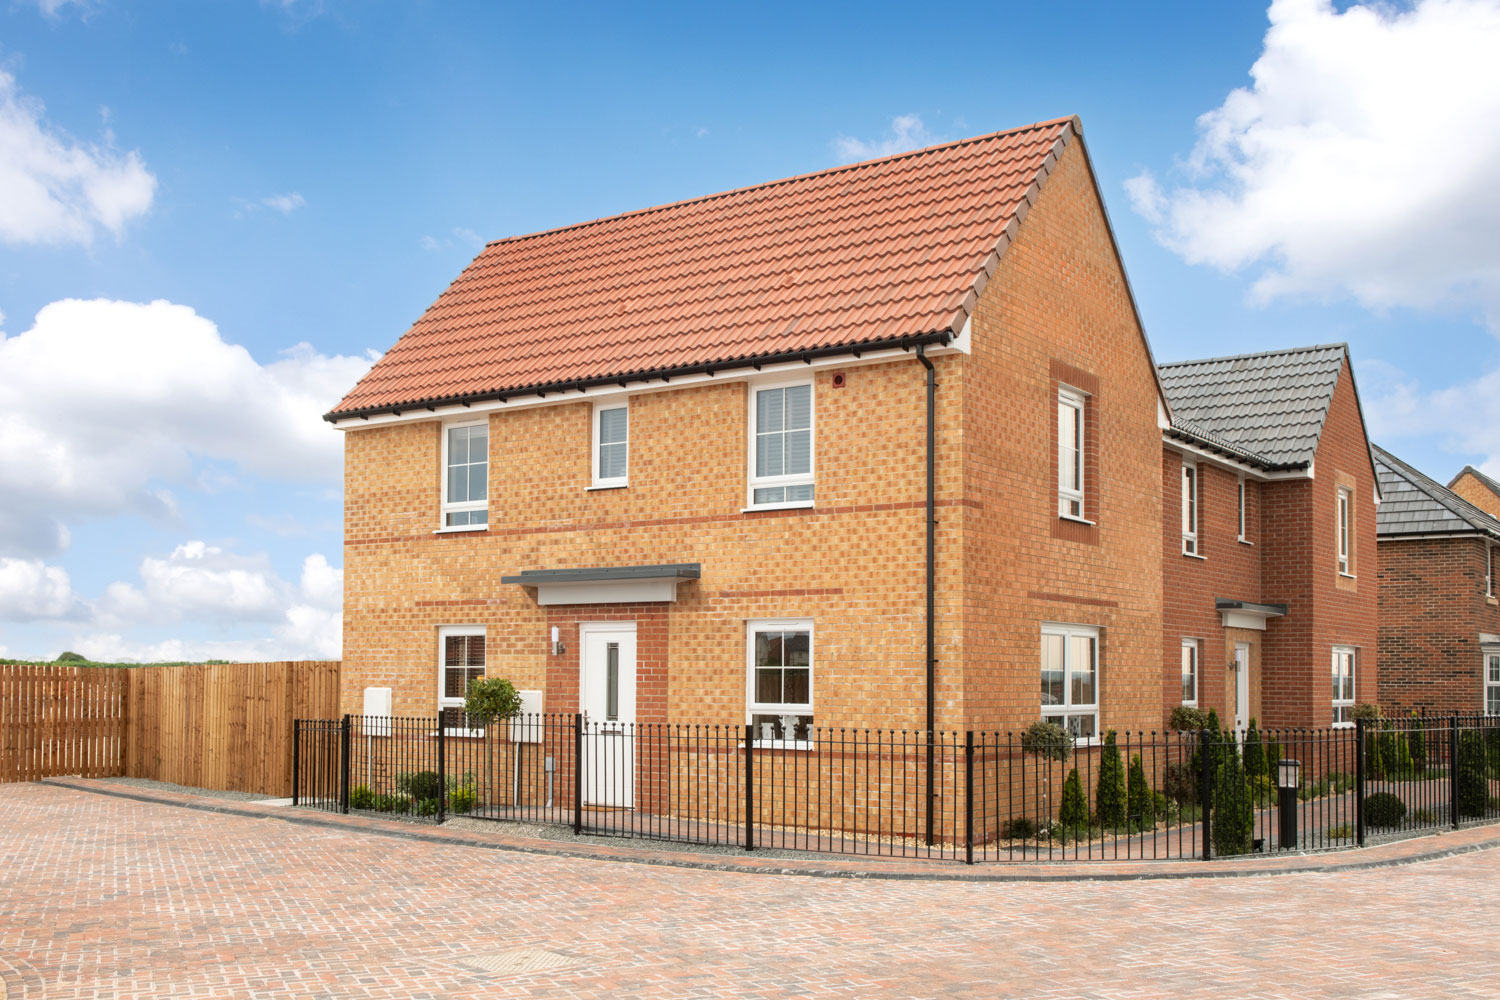 Property 1 of 9. The Moresby Show Home At Stirling Park, Brough